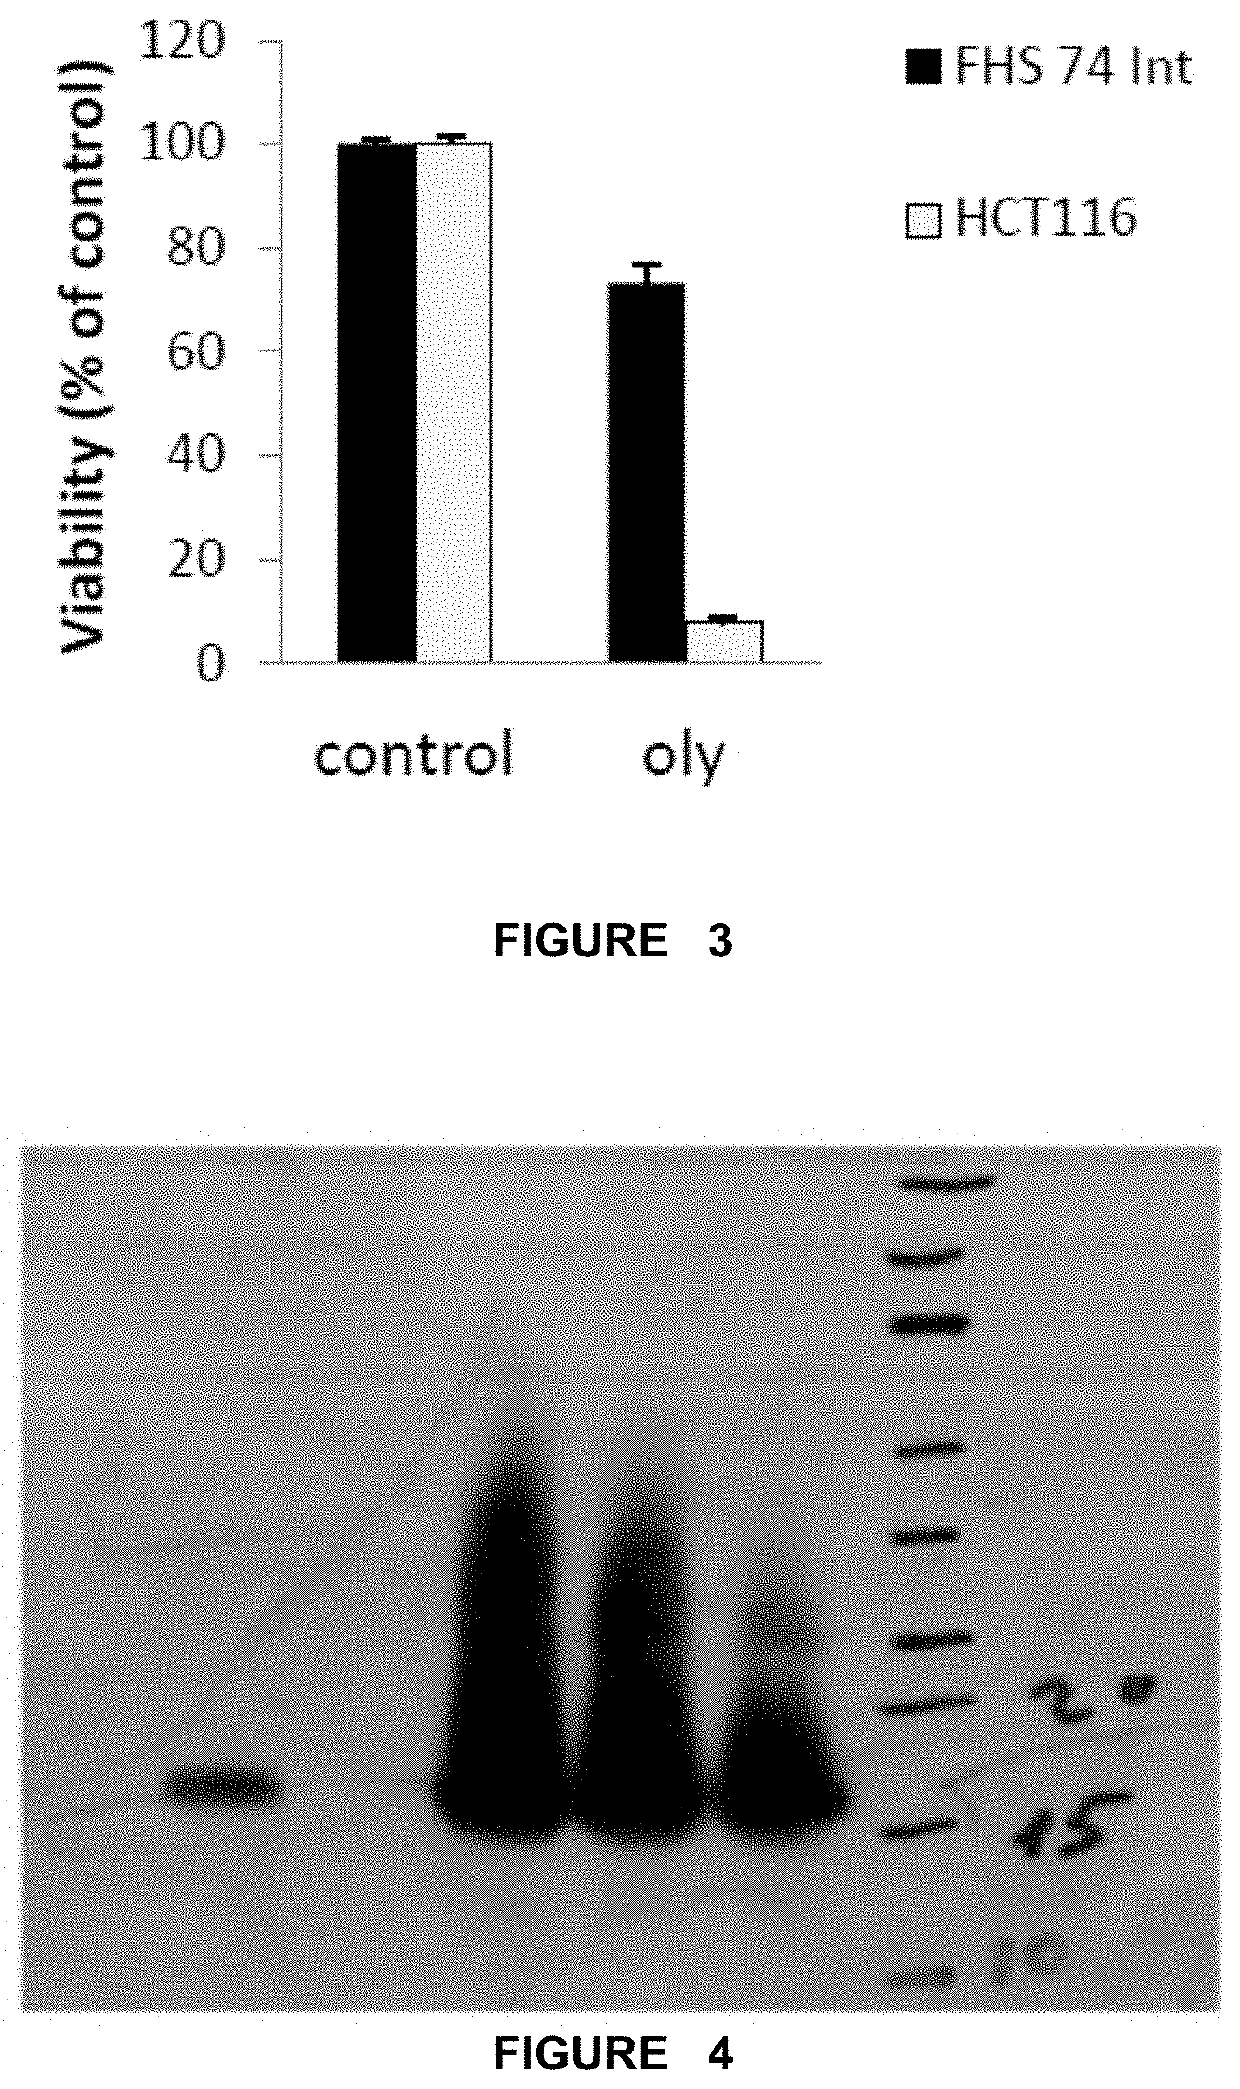 Method of treating overweight or obesity comprising administering a pleurotus ostreatus mushroom extract or a composition comprising a pleurotus ostretus mushroom extract